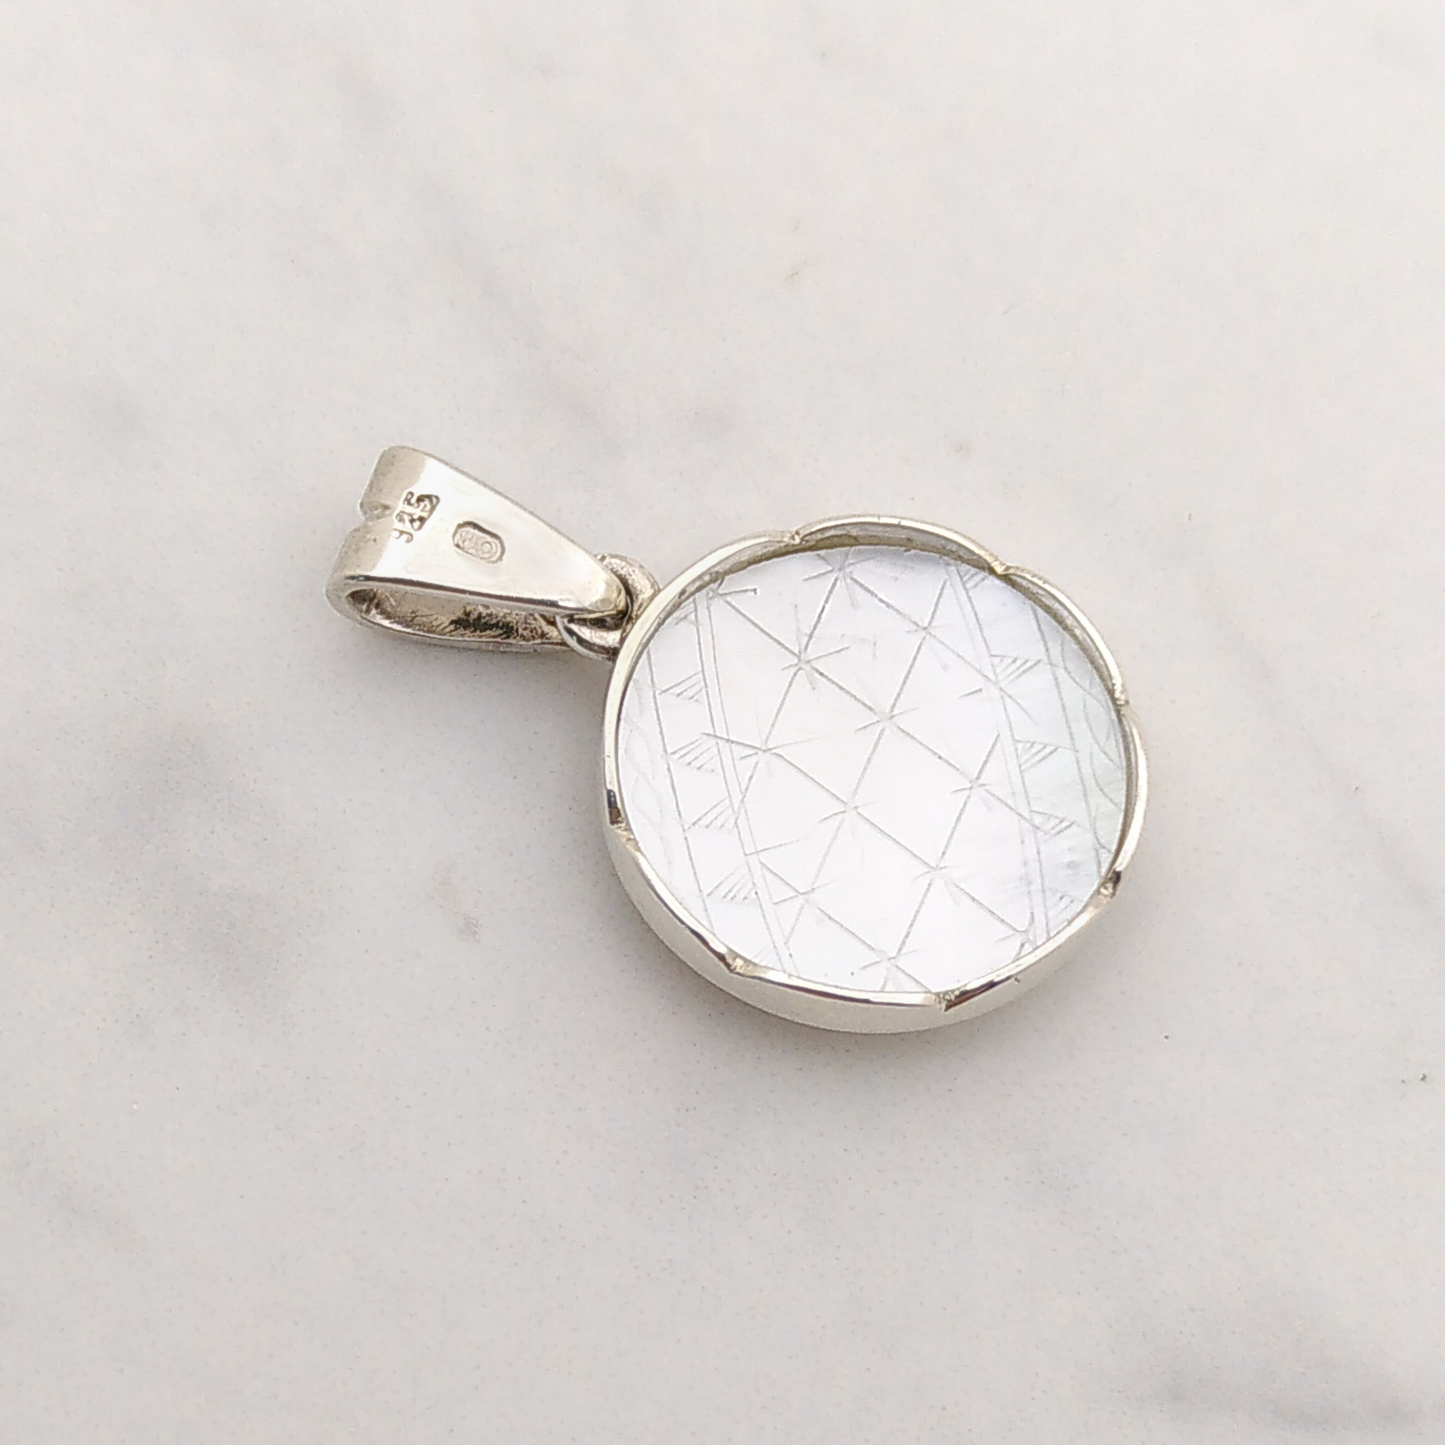 This picture shows the back of the Marguerite pendant. A rond mother of pearl disc is set in silver, and one can see engraved lines forming a thin geometric pattern.